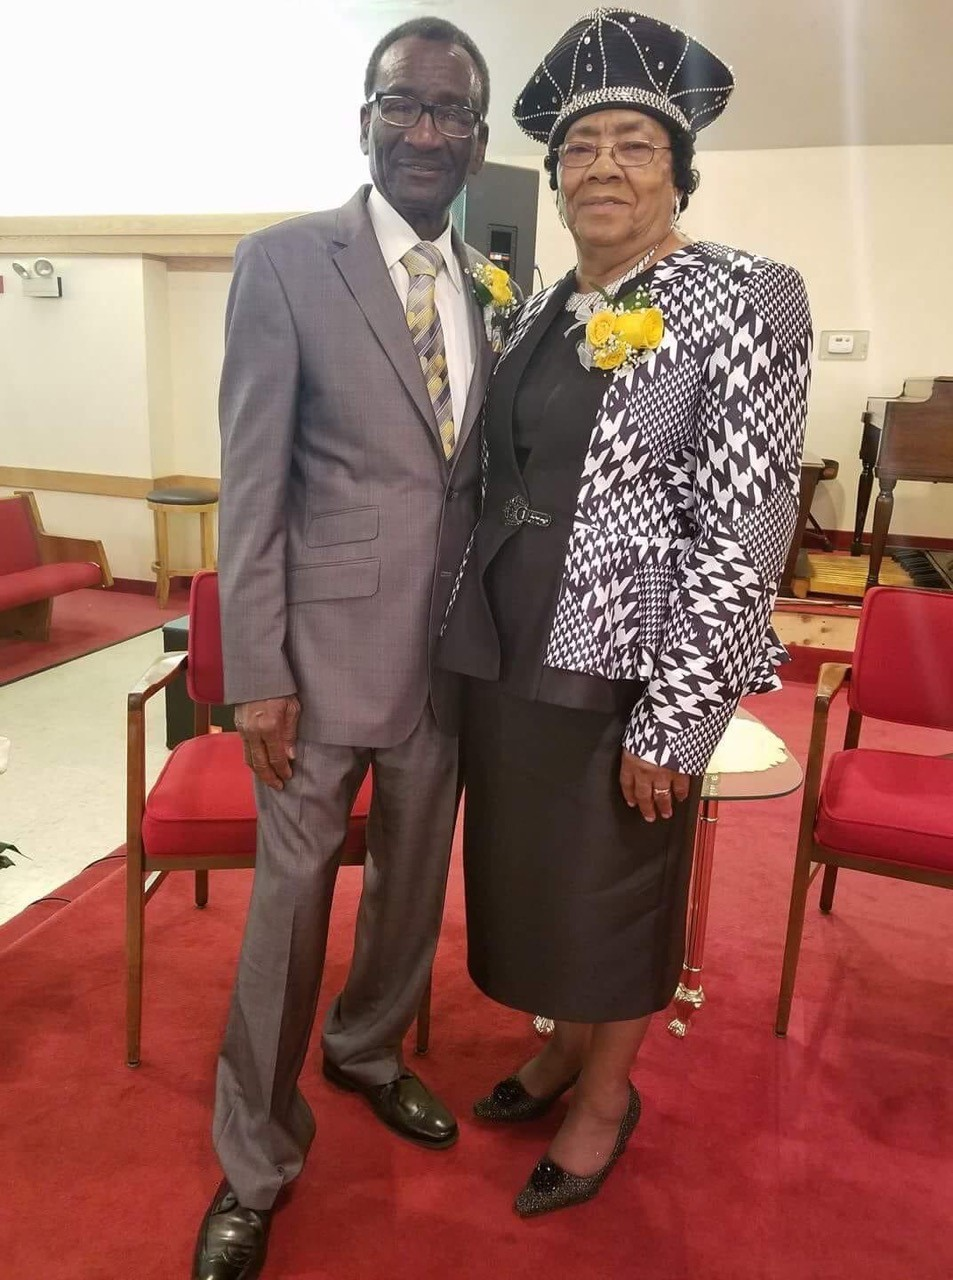 Pastor Nebraski-Carter, 87, and his wife, first lady Nebraski-Carter, have been in ministry for almost 50 years.